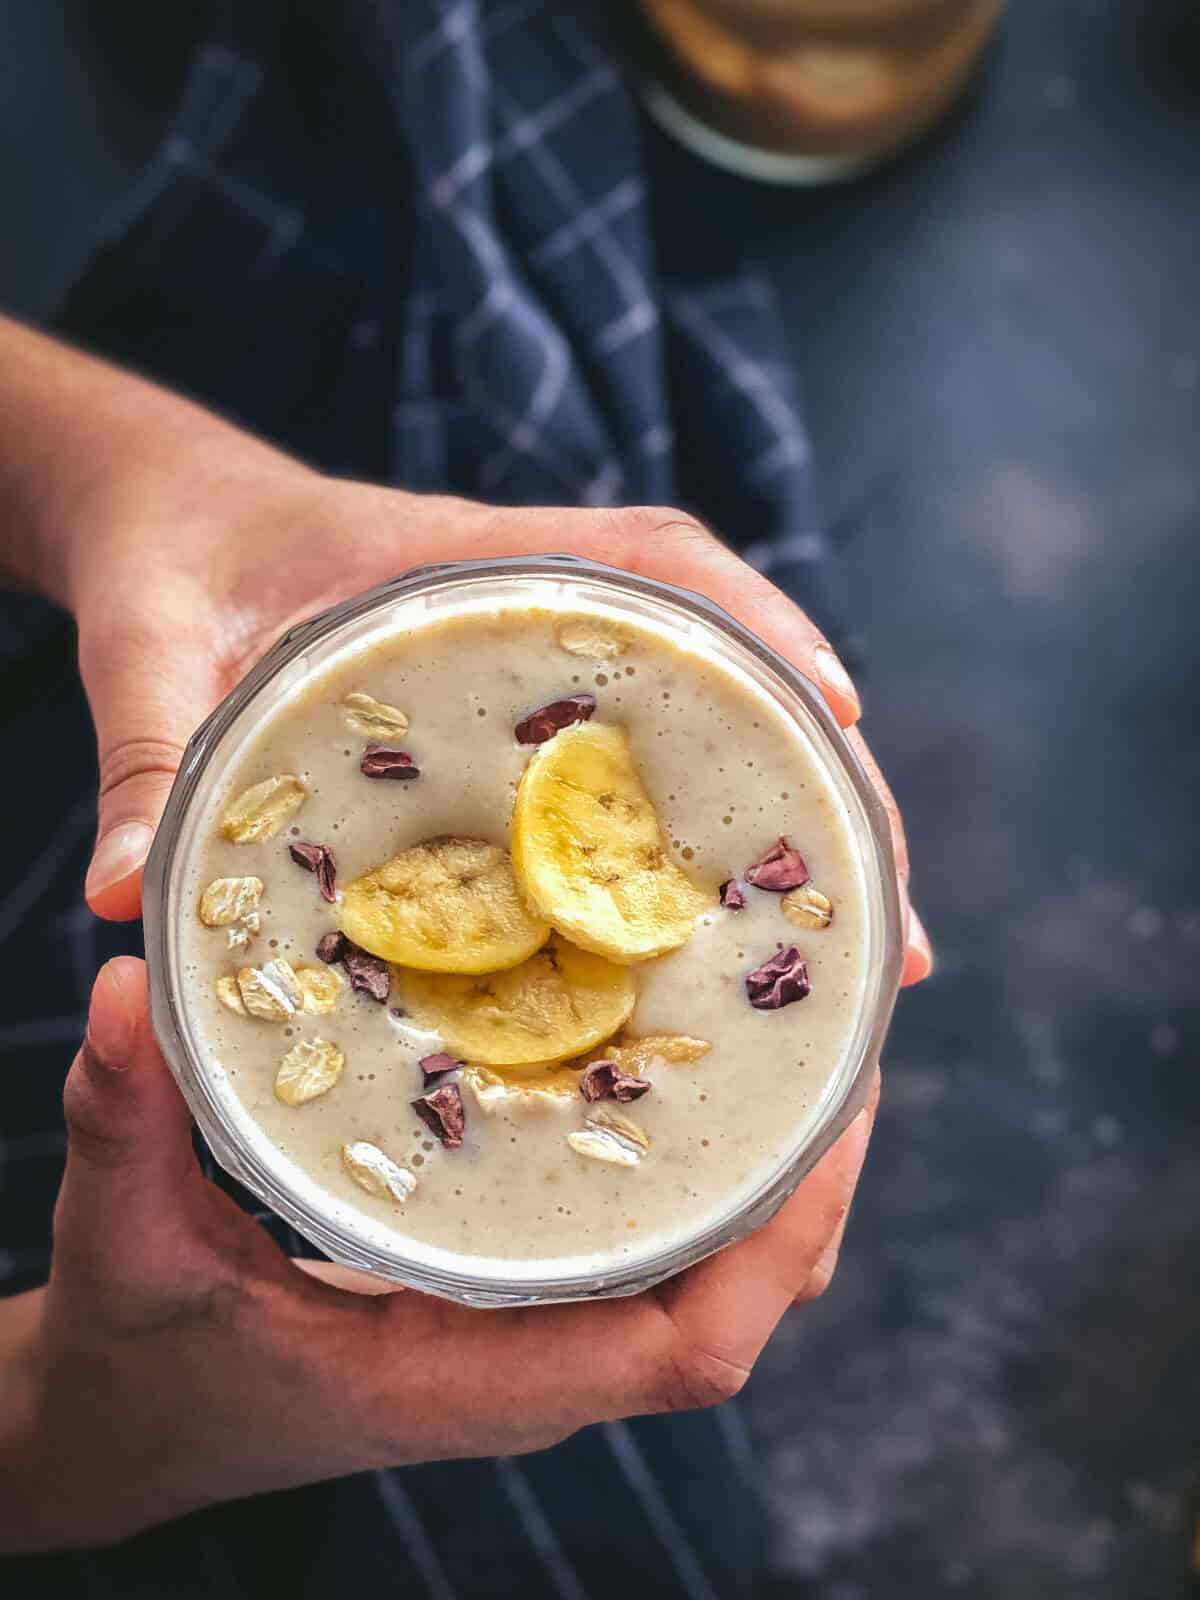 A hand holding a glass of Peanut Butter Banana Smoothie topped with banana and oats